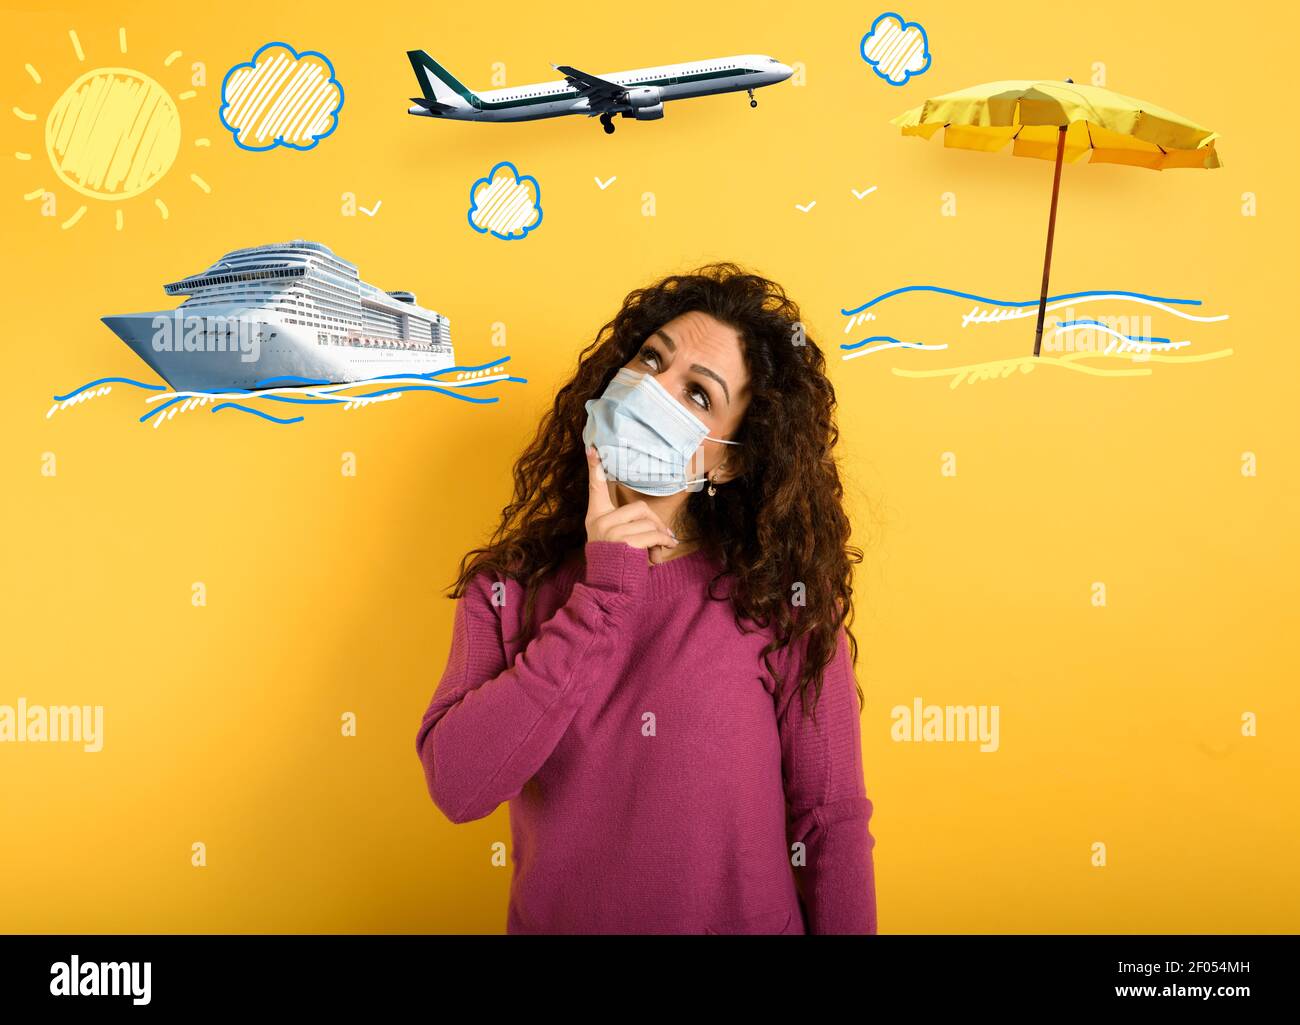 Woman want to travel but is worried about codiv-19 pandemic. yellow background Stock Photo